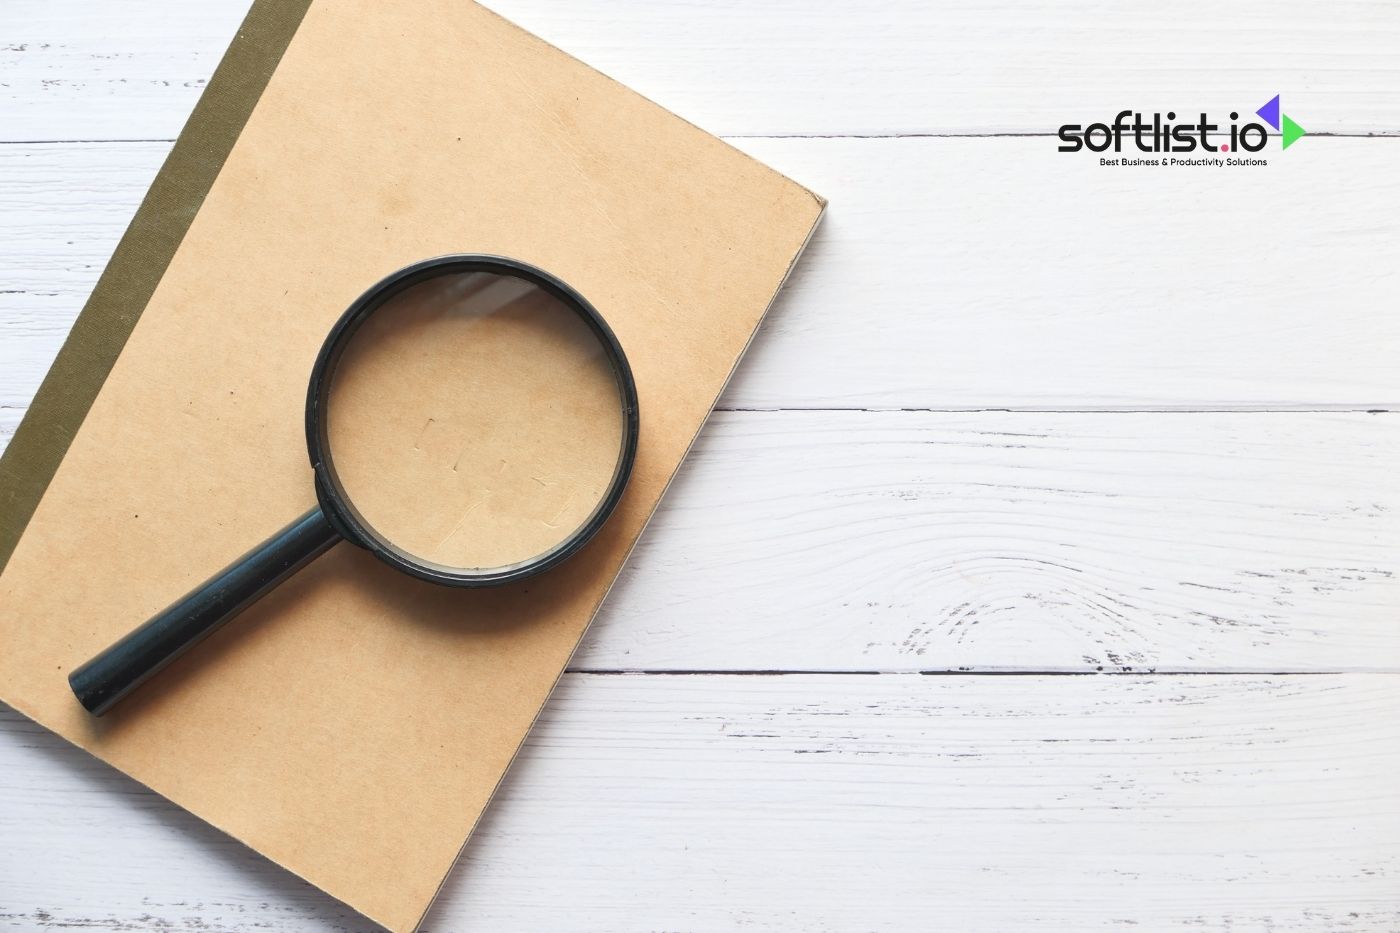 Magnifying glass on a notebook with softlist.io logo on white wooden background.